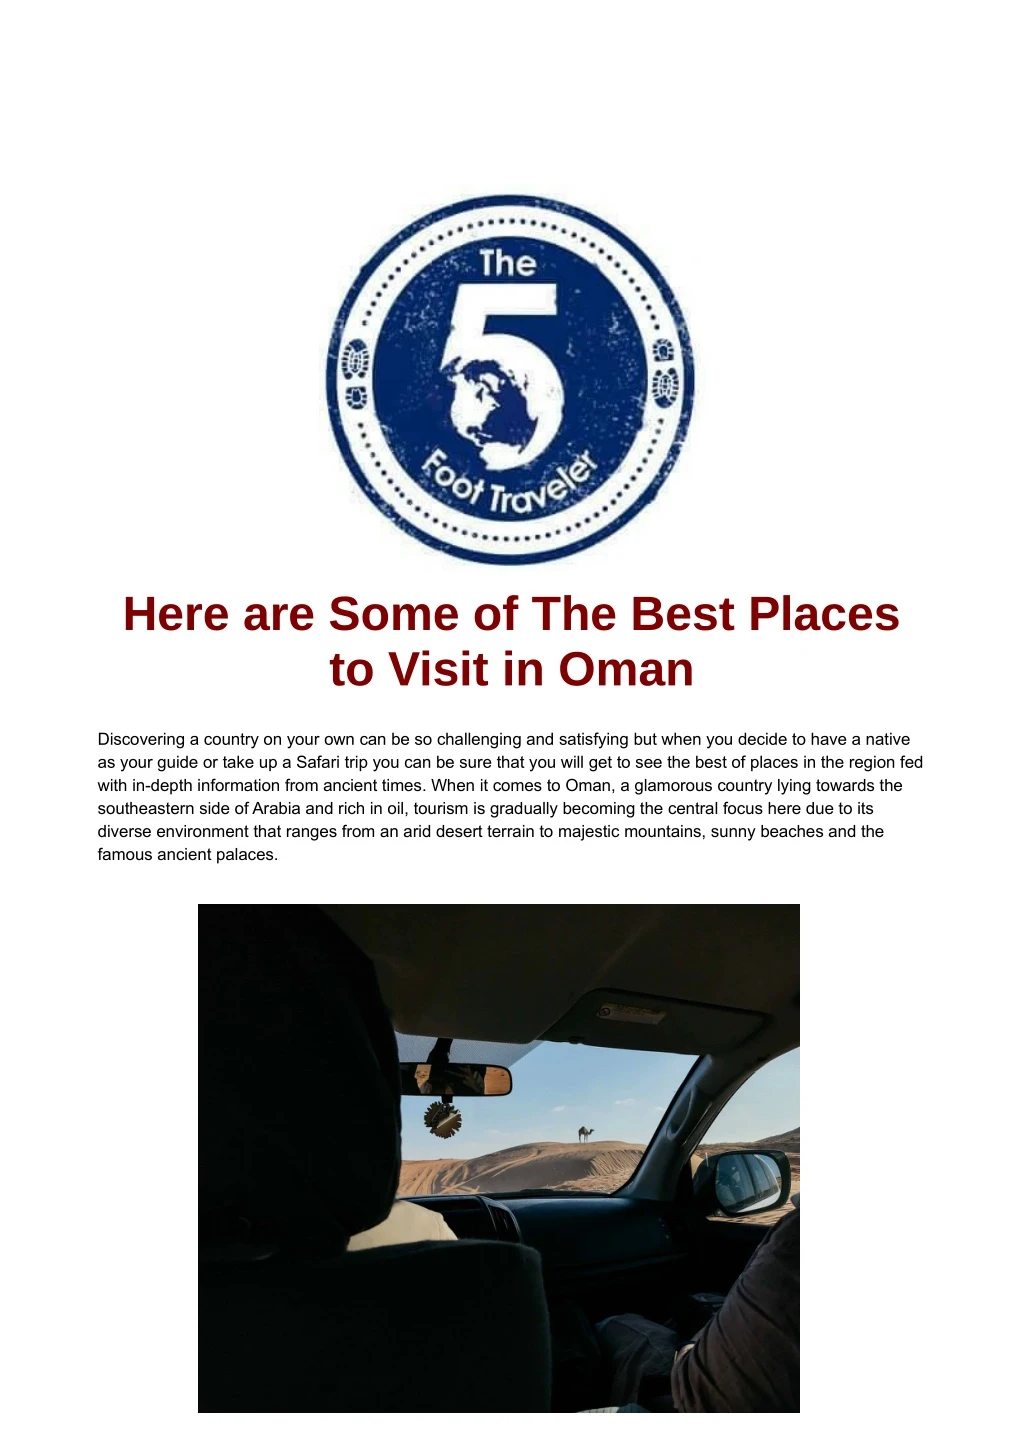 here are some of the best places to visit in oman